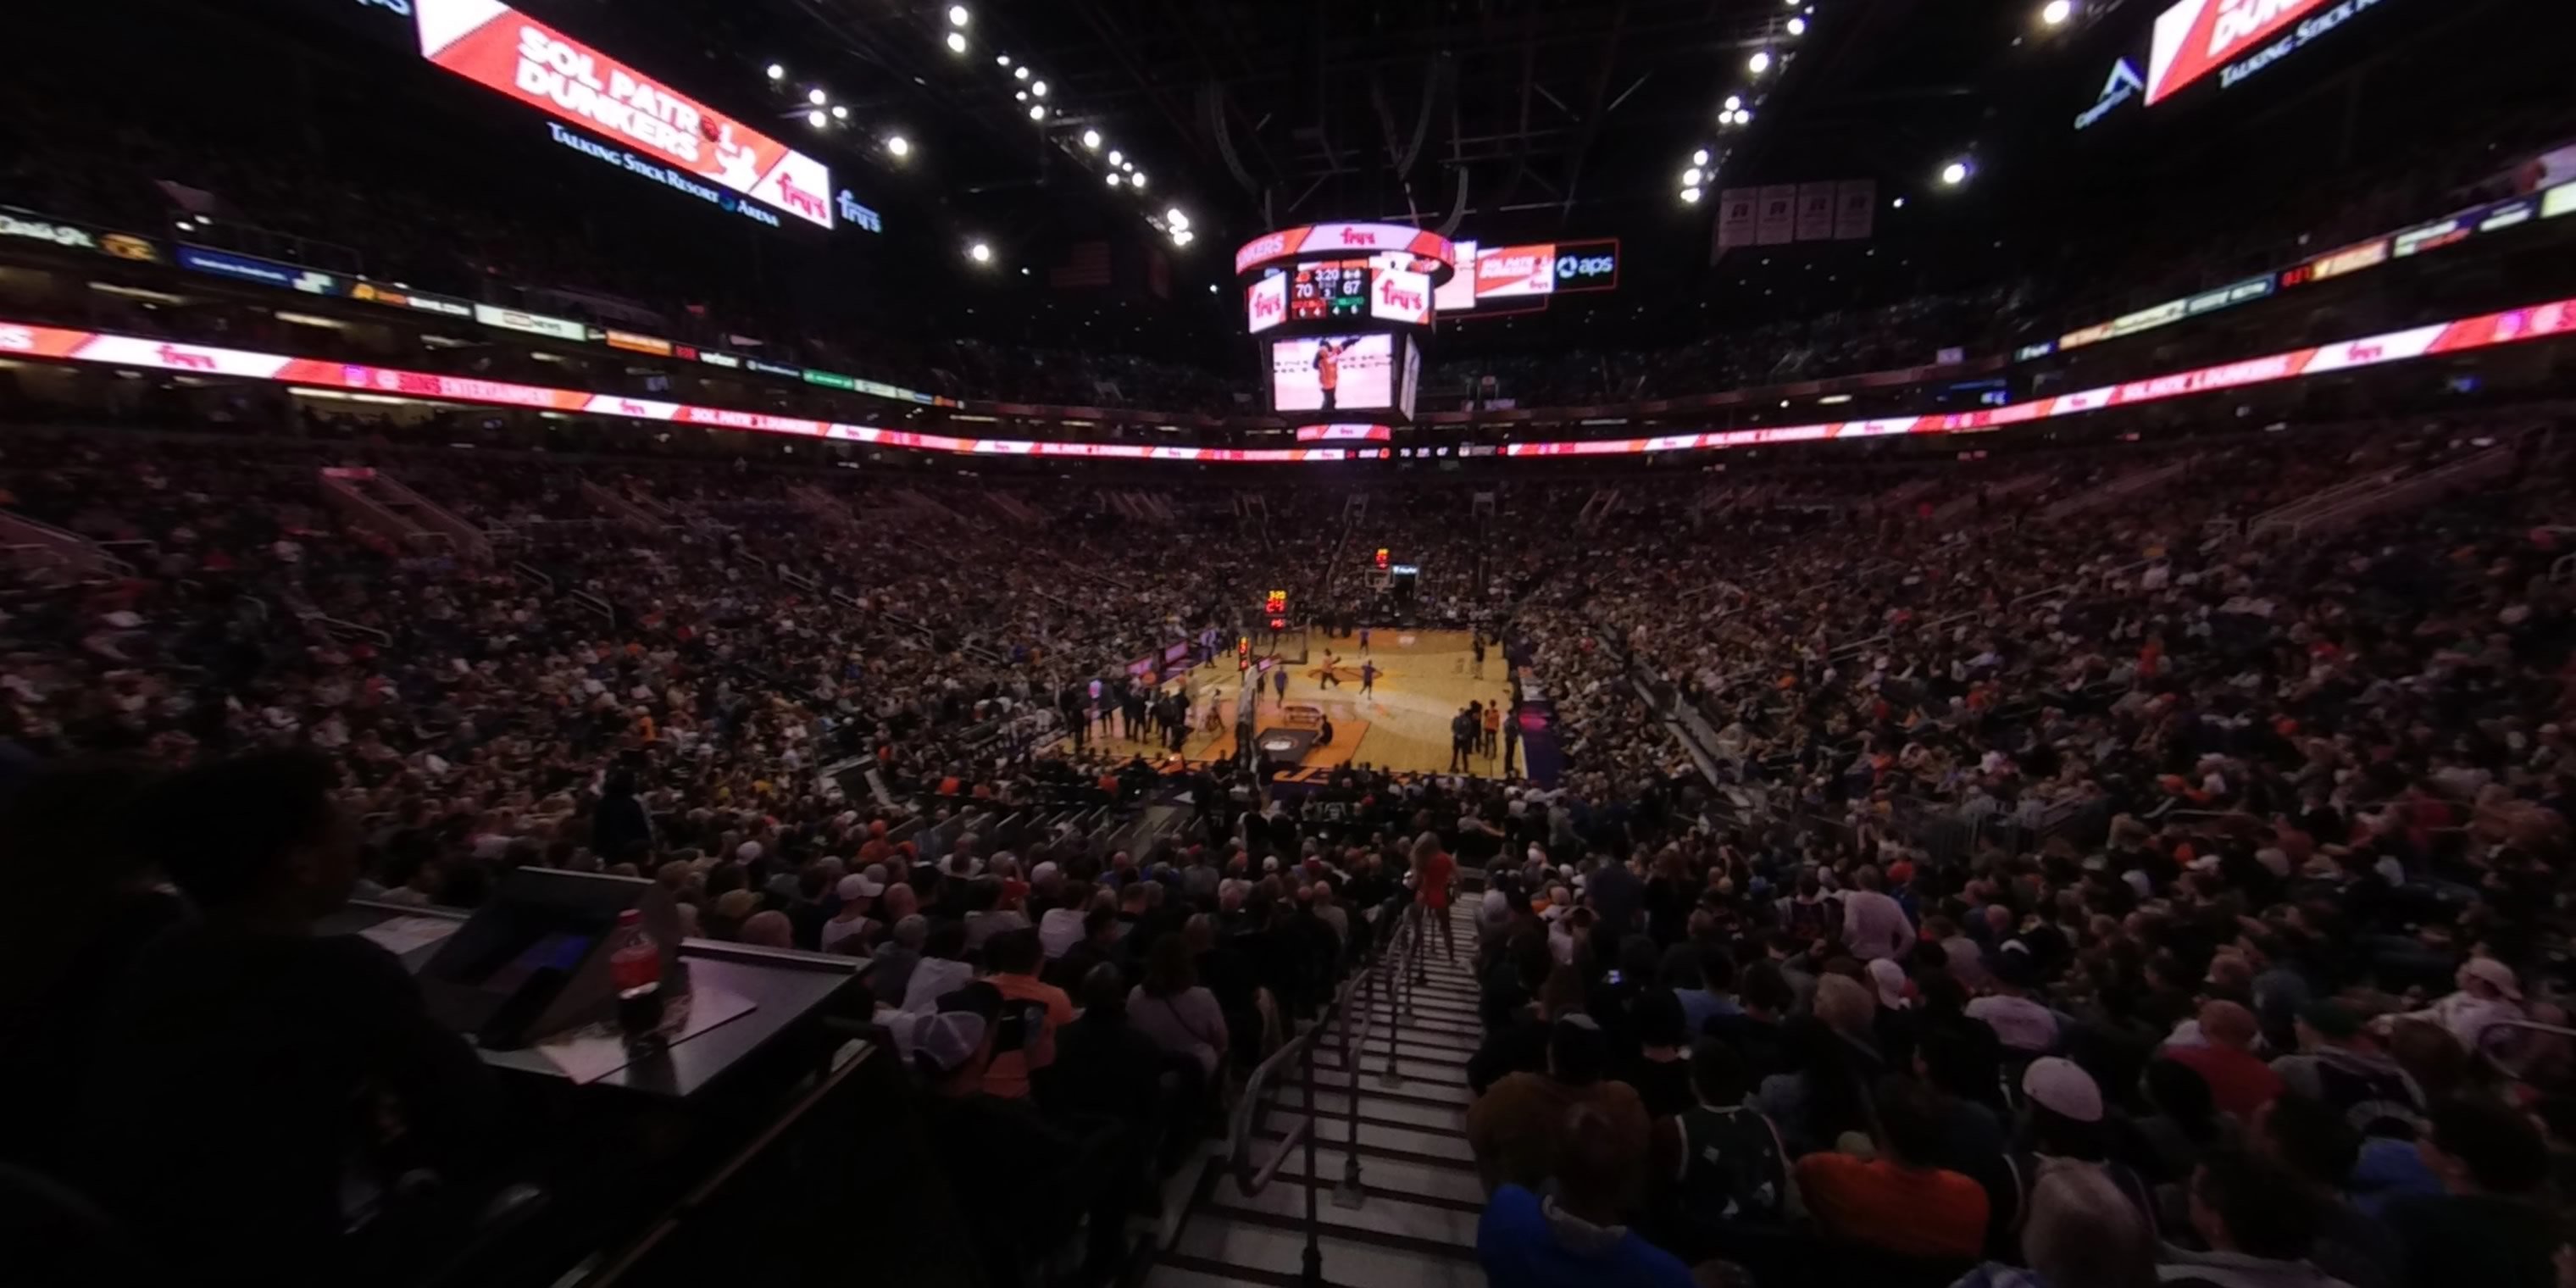 section 119 panoramic seat view  for basketball - footprint center